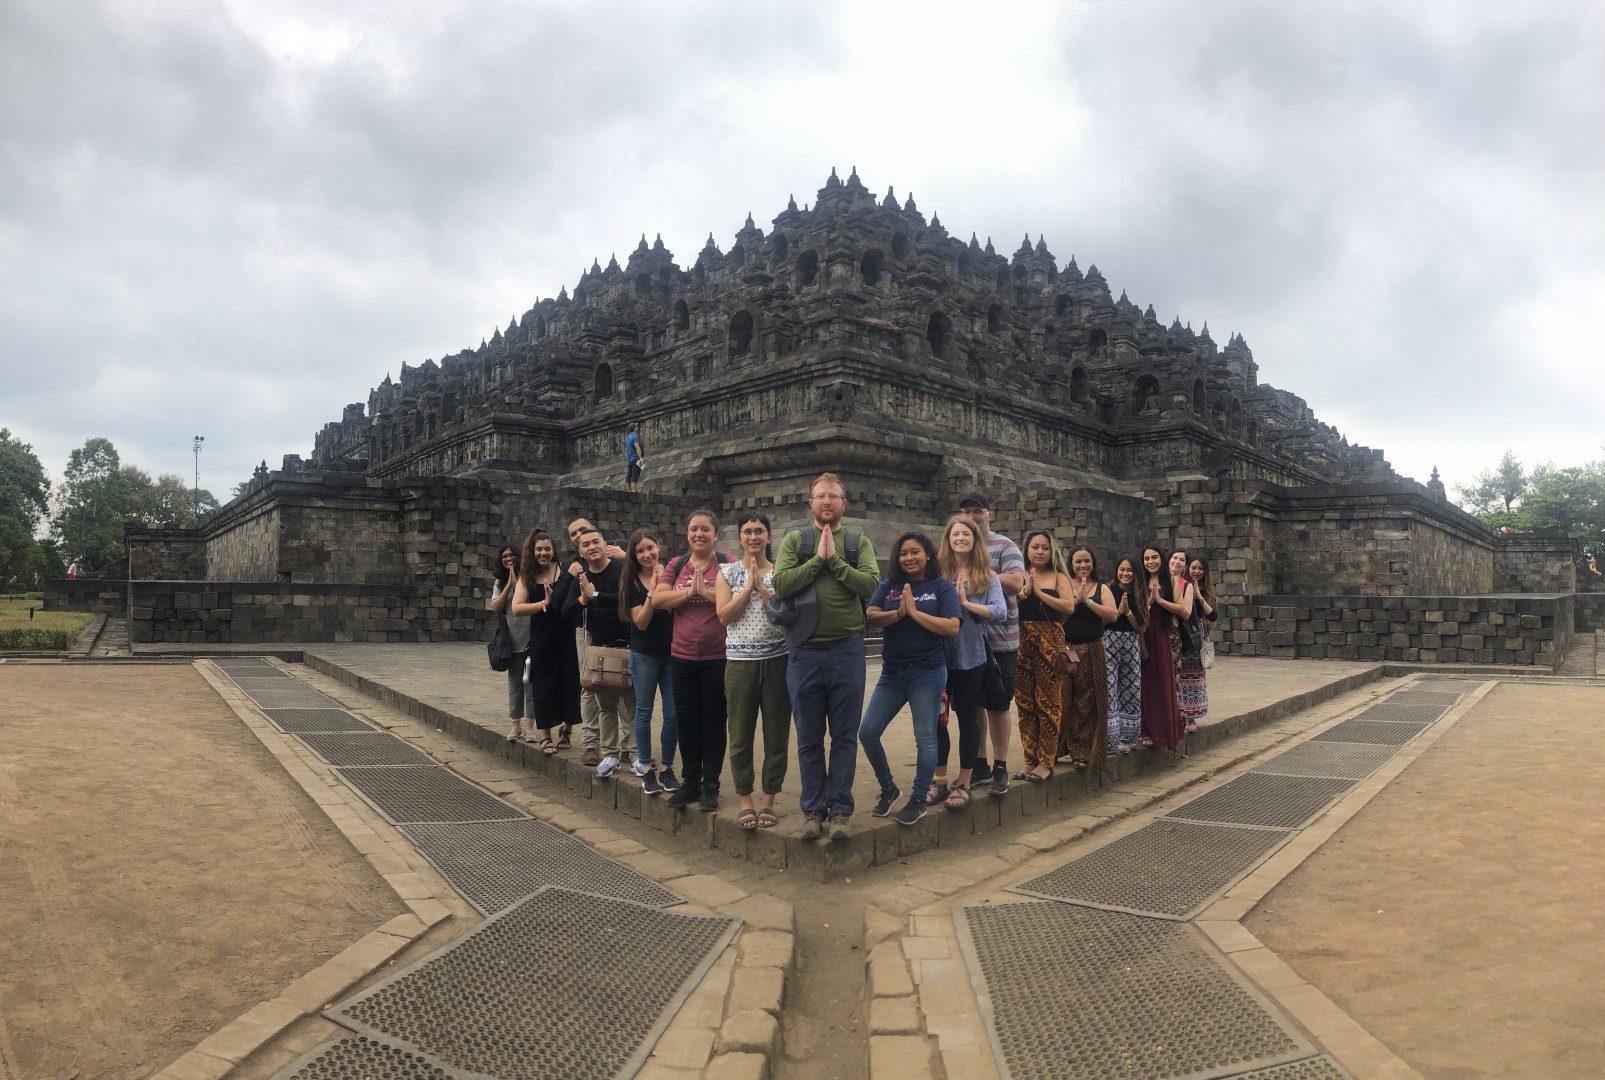 A group of 15 Fresno State students presented research projects over the summer in Indonesia. (Courtesy Dheeshana Jayasundara)